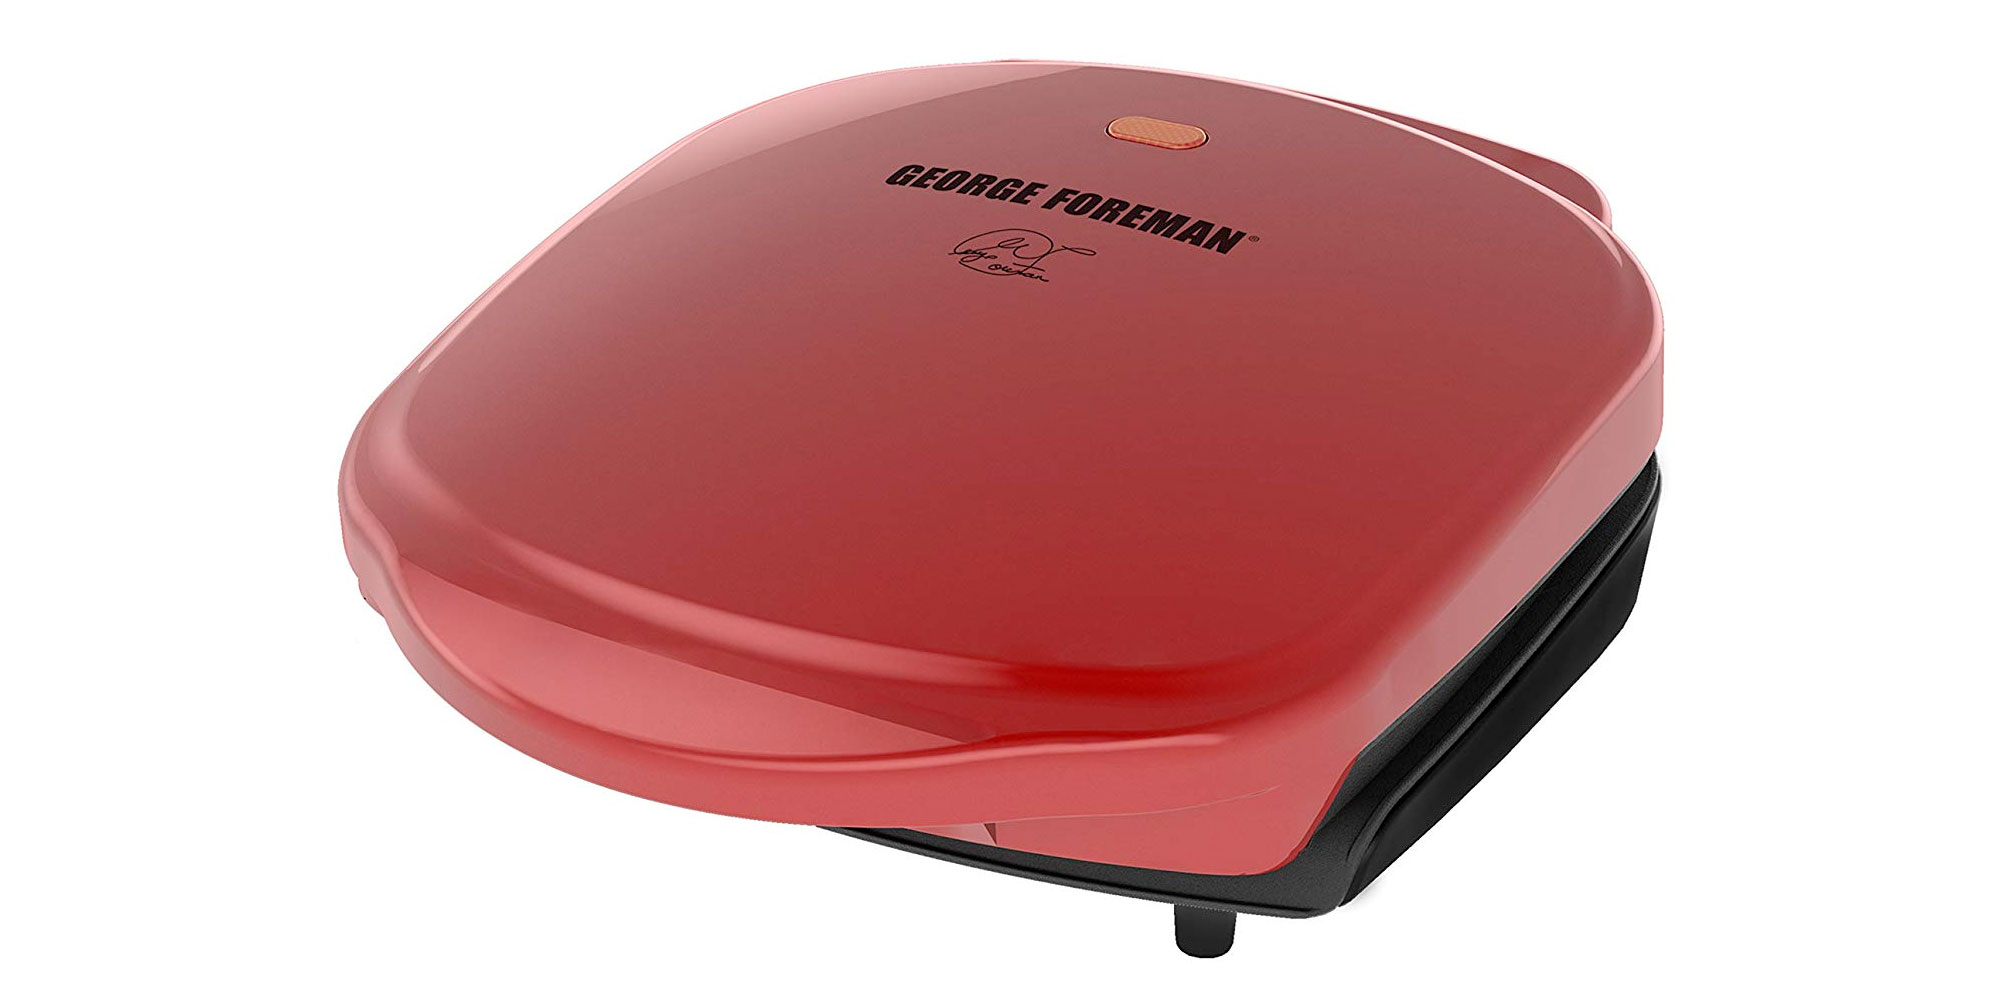 Make burgers & paninis w/ the George Foreman Indoor Grill at $16